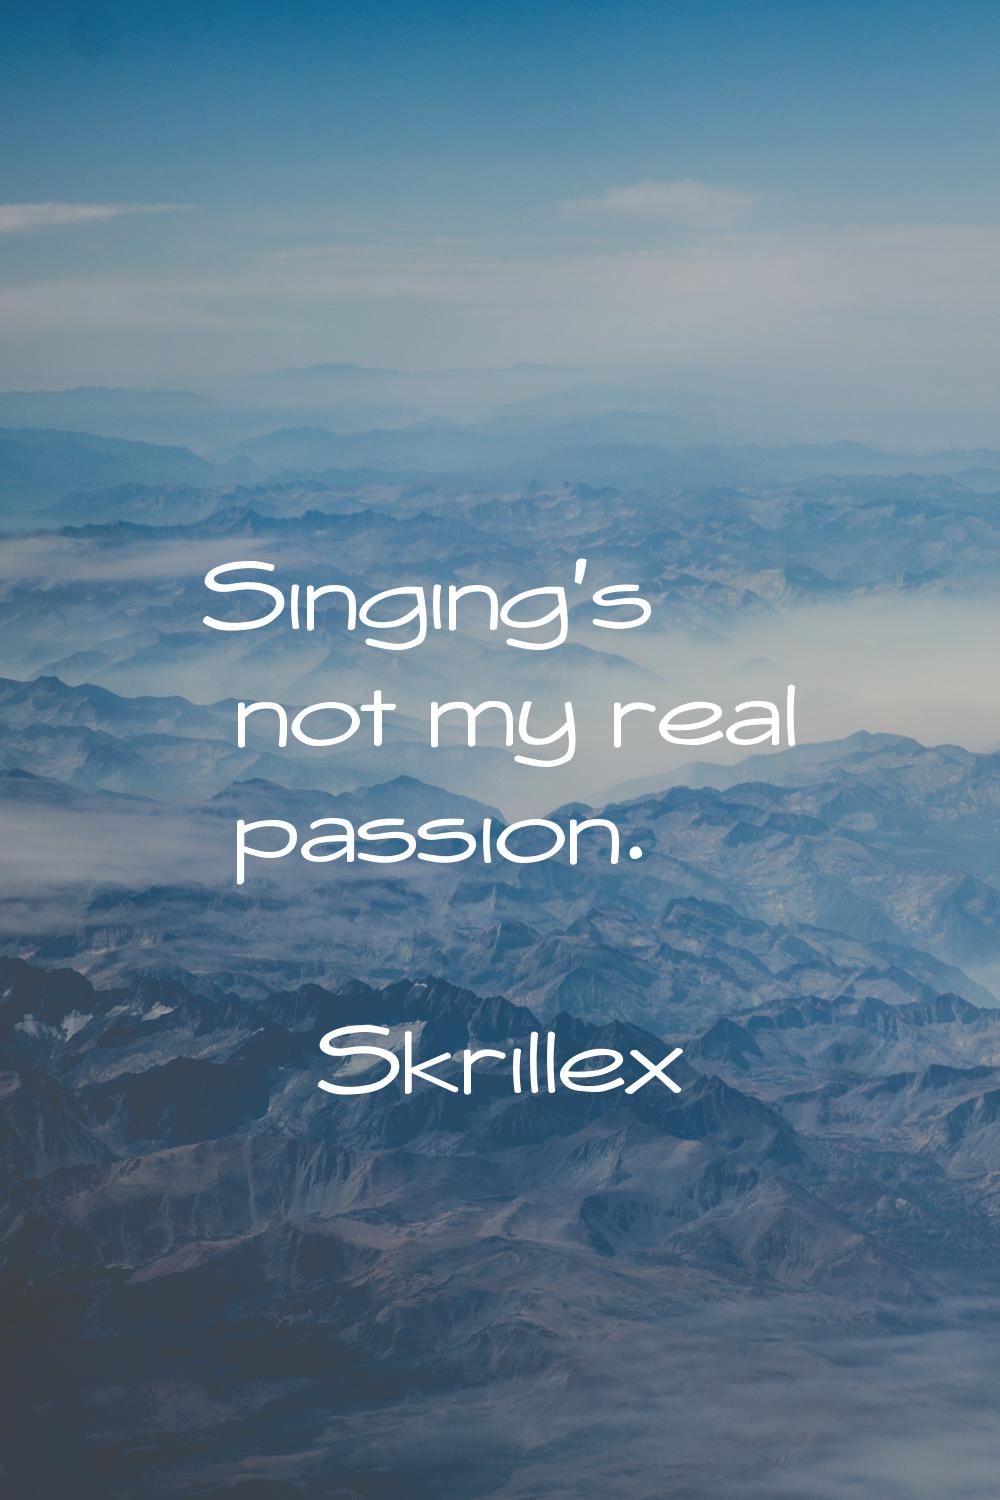 Singing's not my real passion.